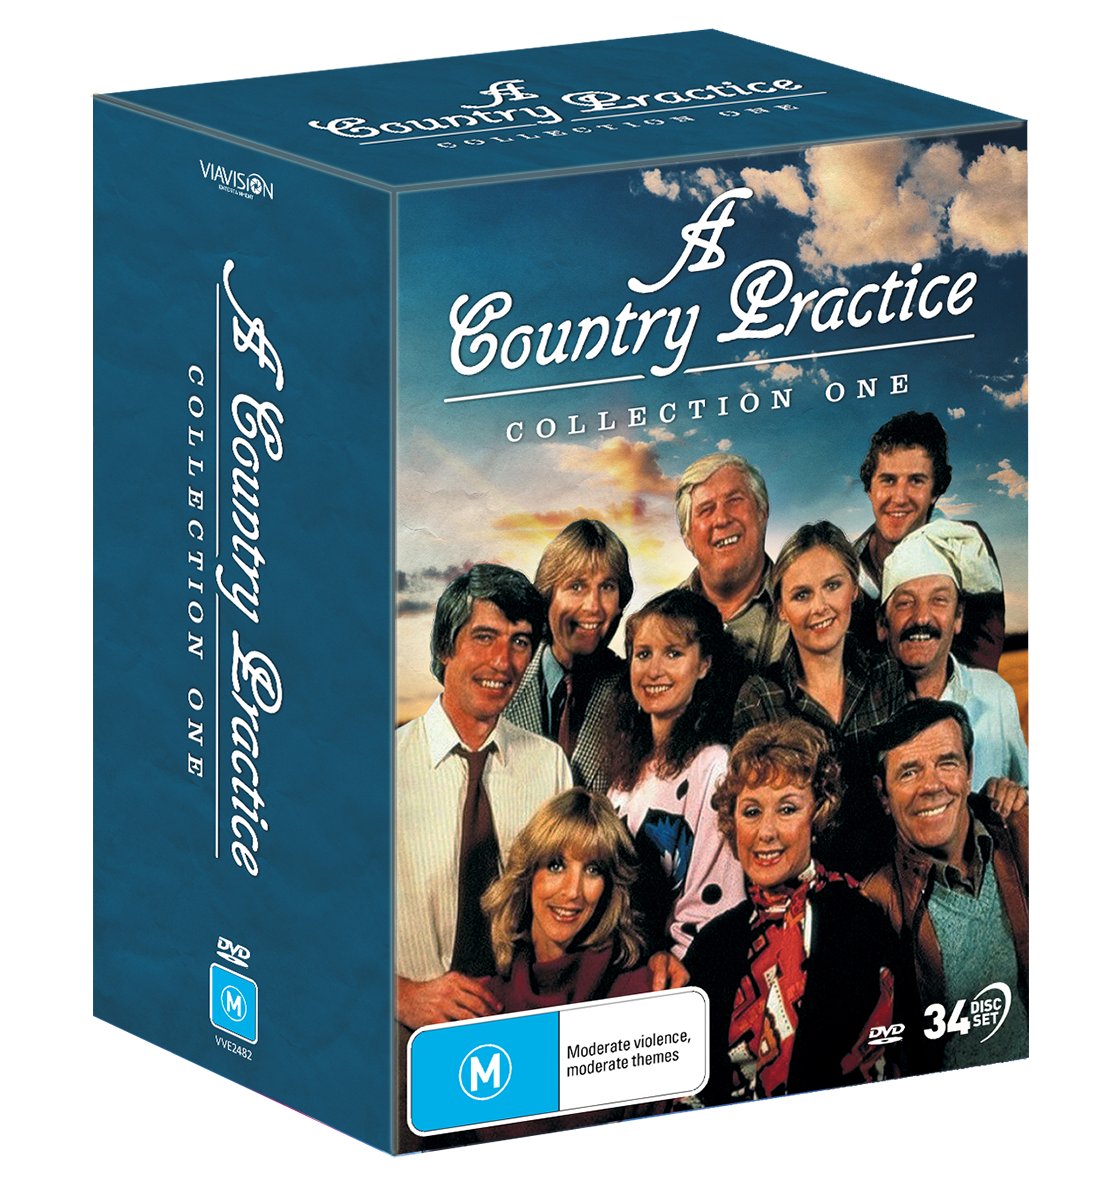 A Country Practice Collection One Via Vision Entertainment